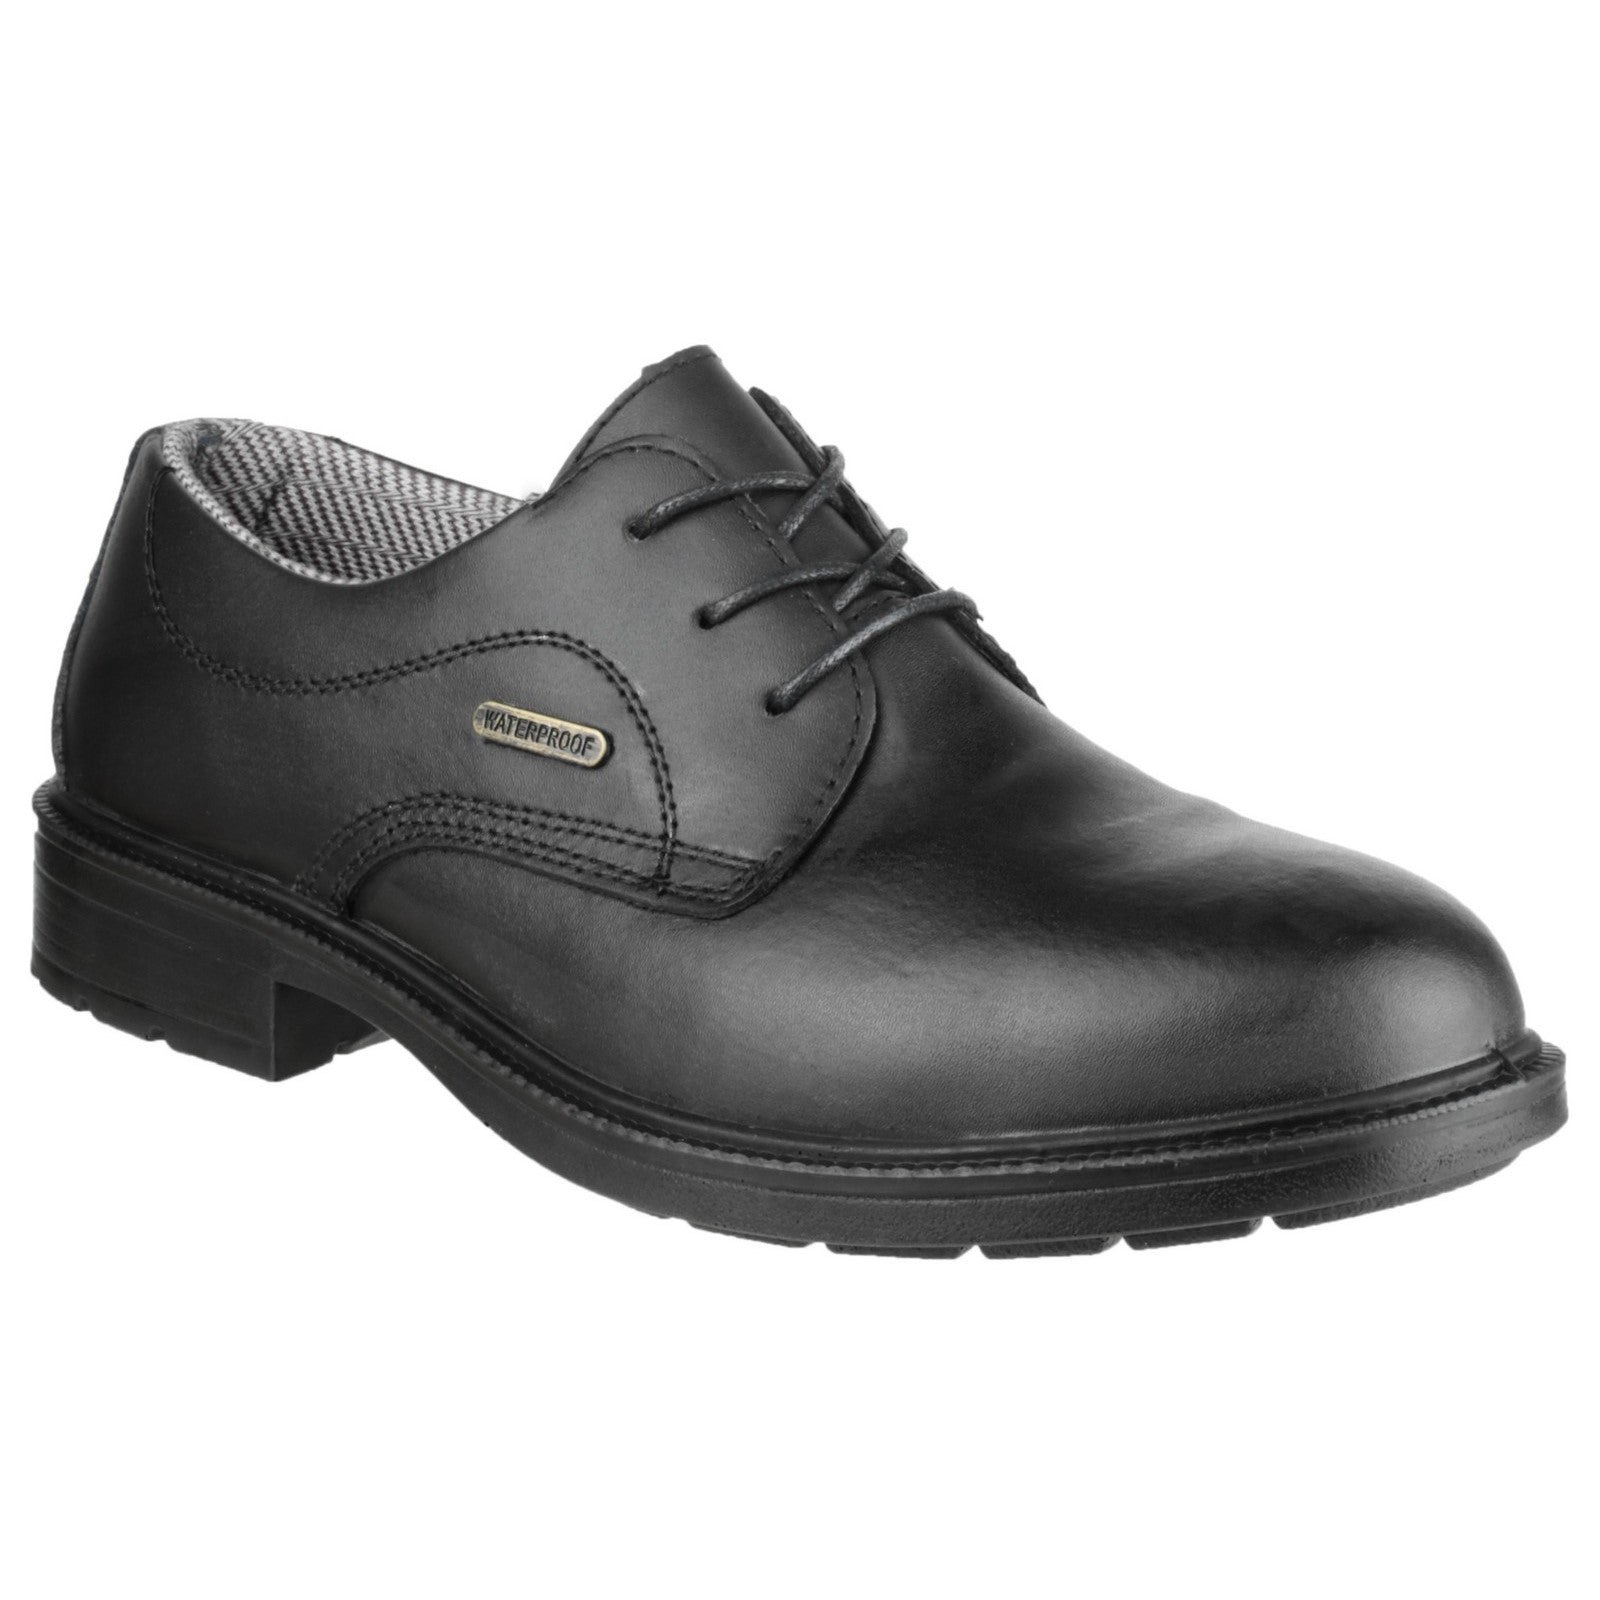 FS62 Gibson Safety Shoe, Amblers Safety